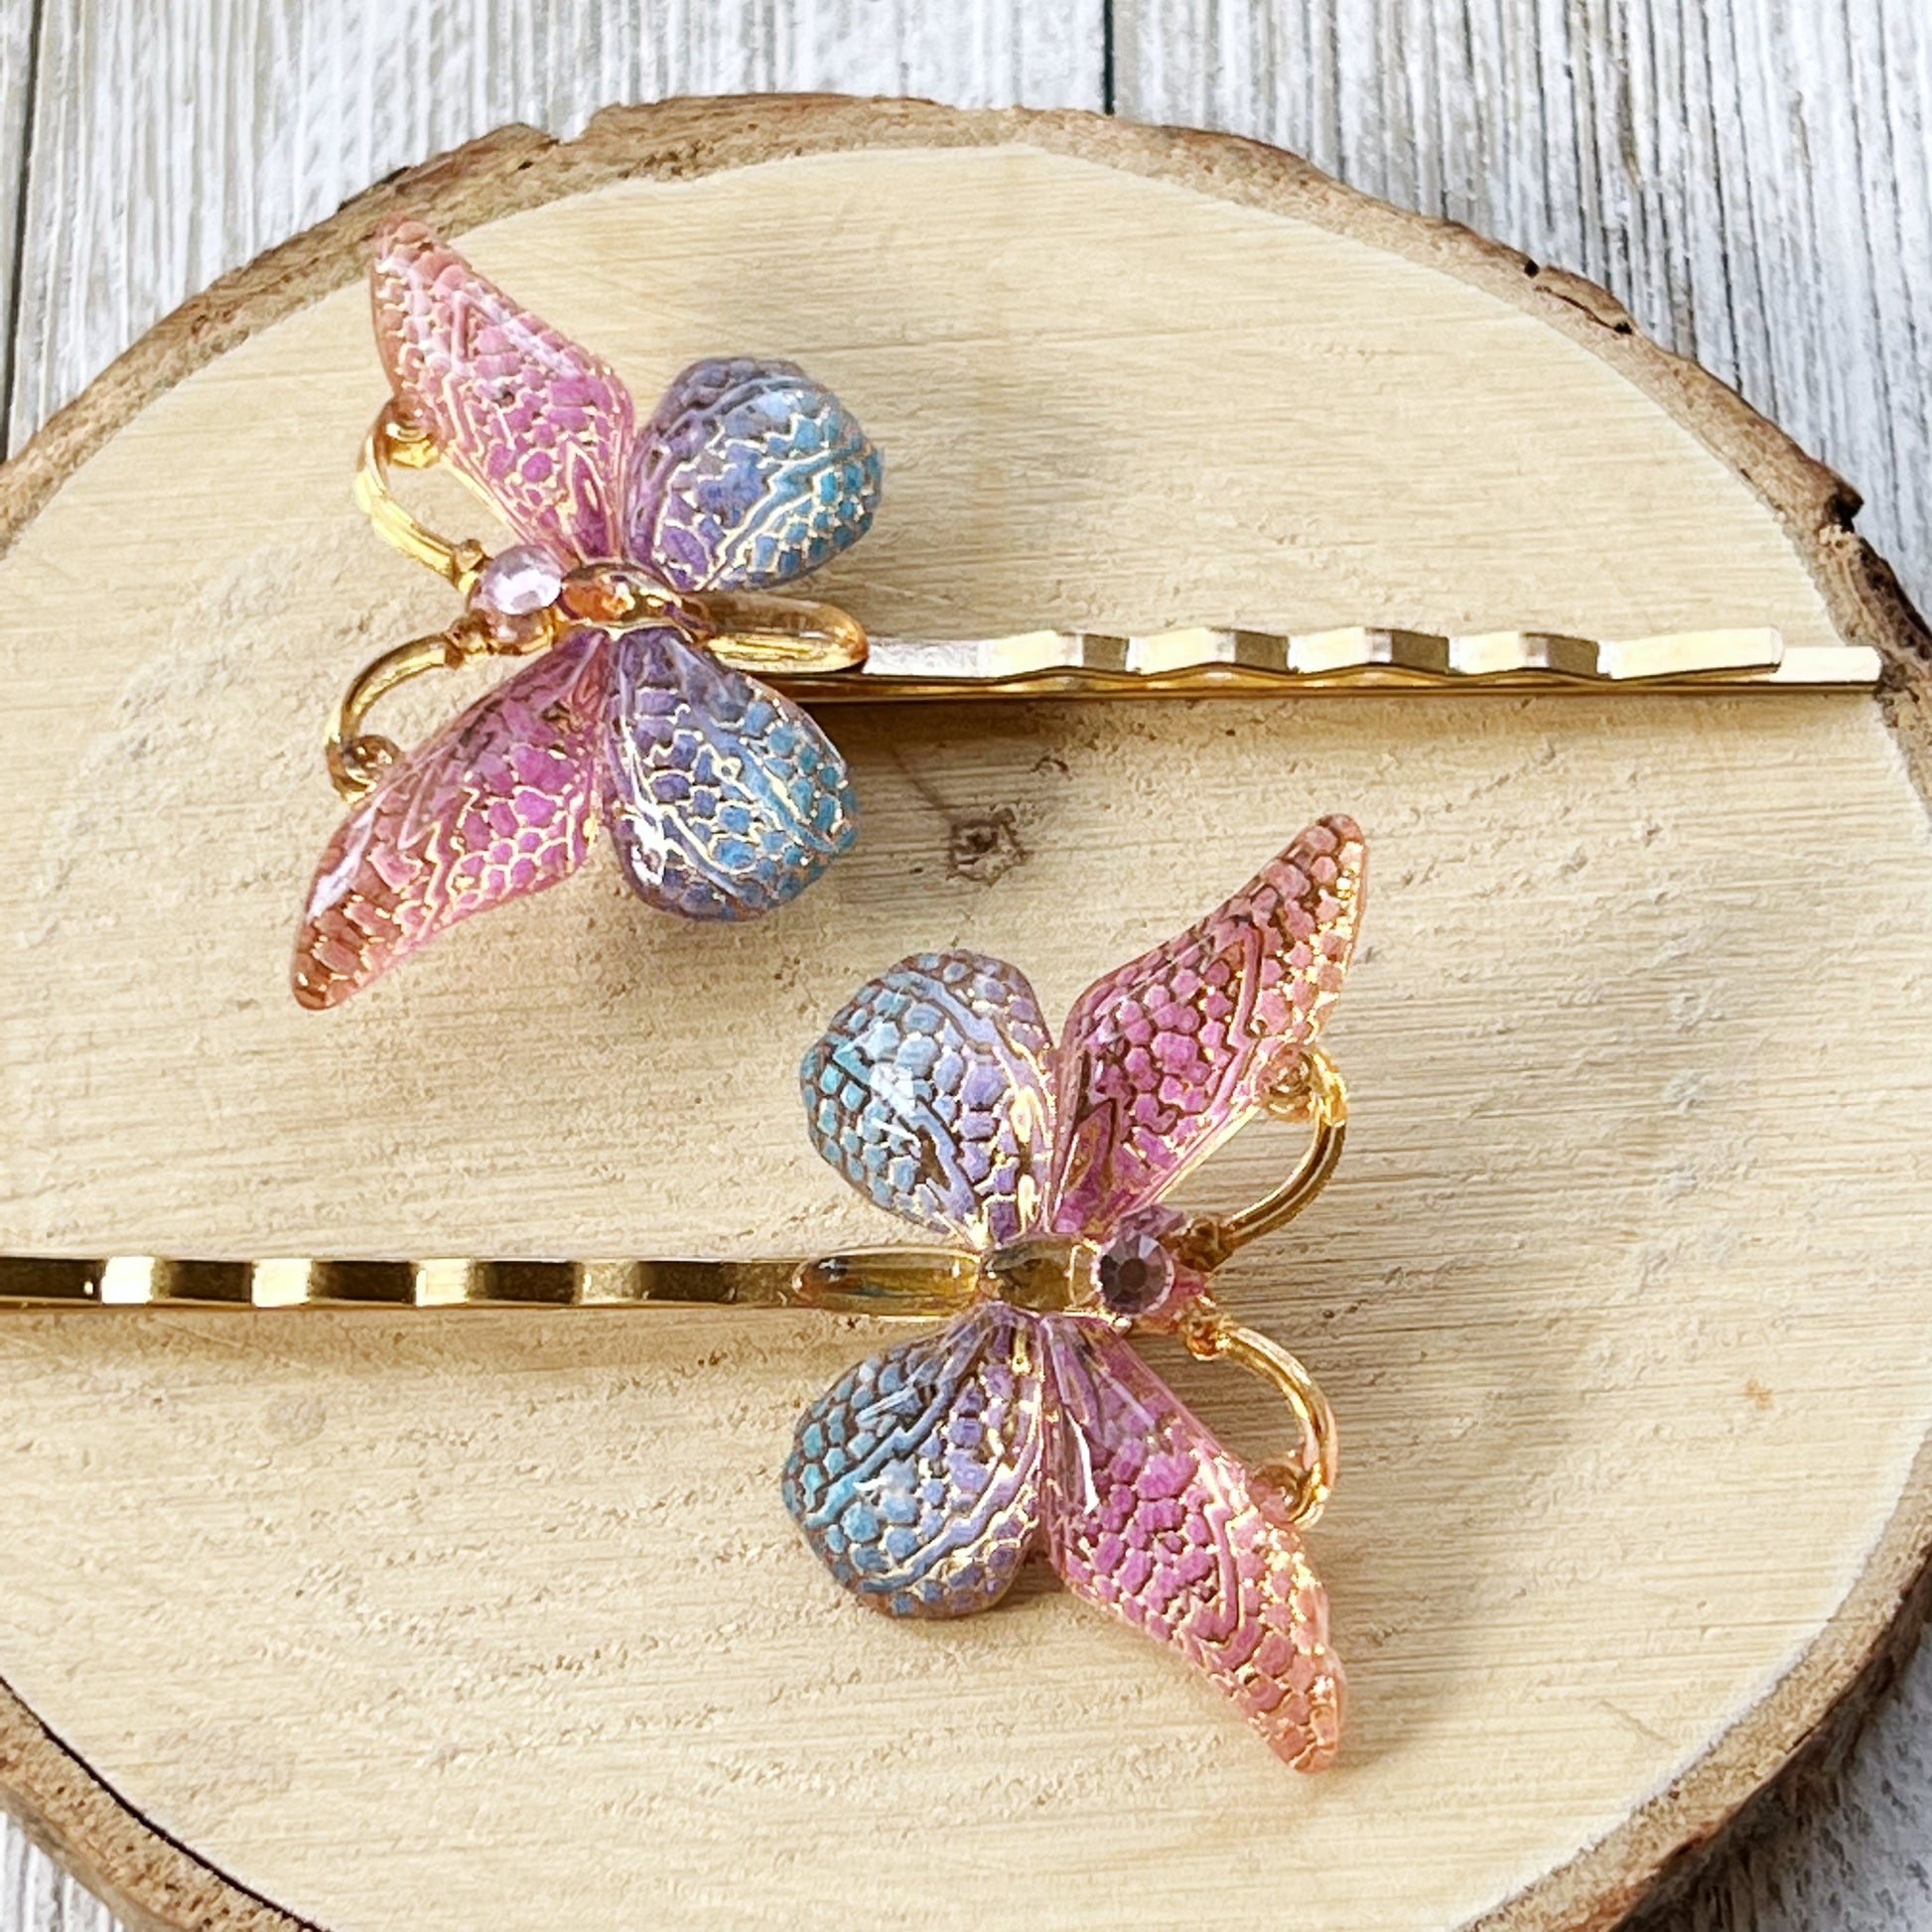 Large Acrylic Butterfly Hair Pins: Vibrant Pink, Blue & Gold tones with Rhinestone Accents for Statement Hairstyles